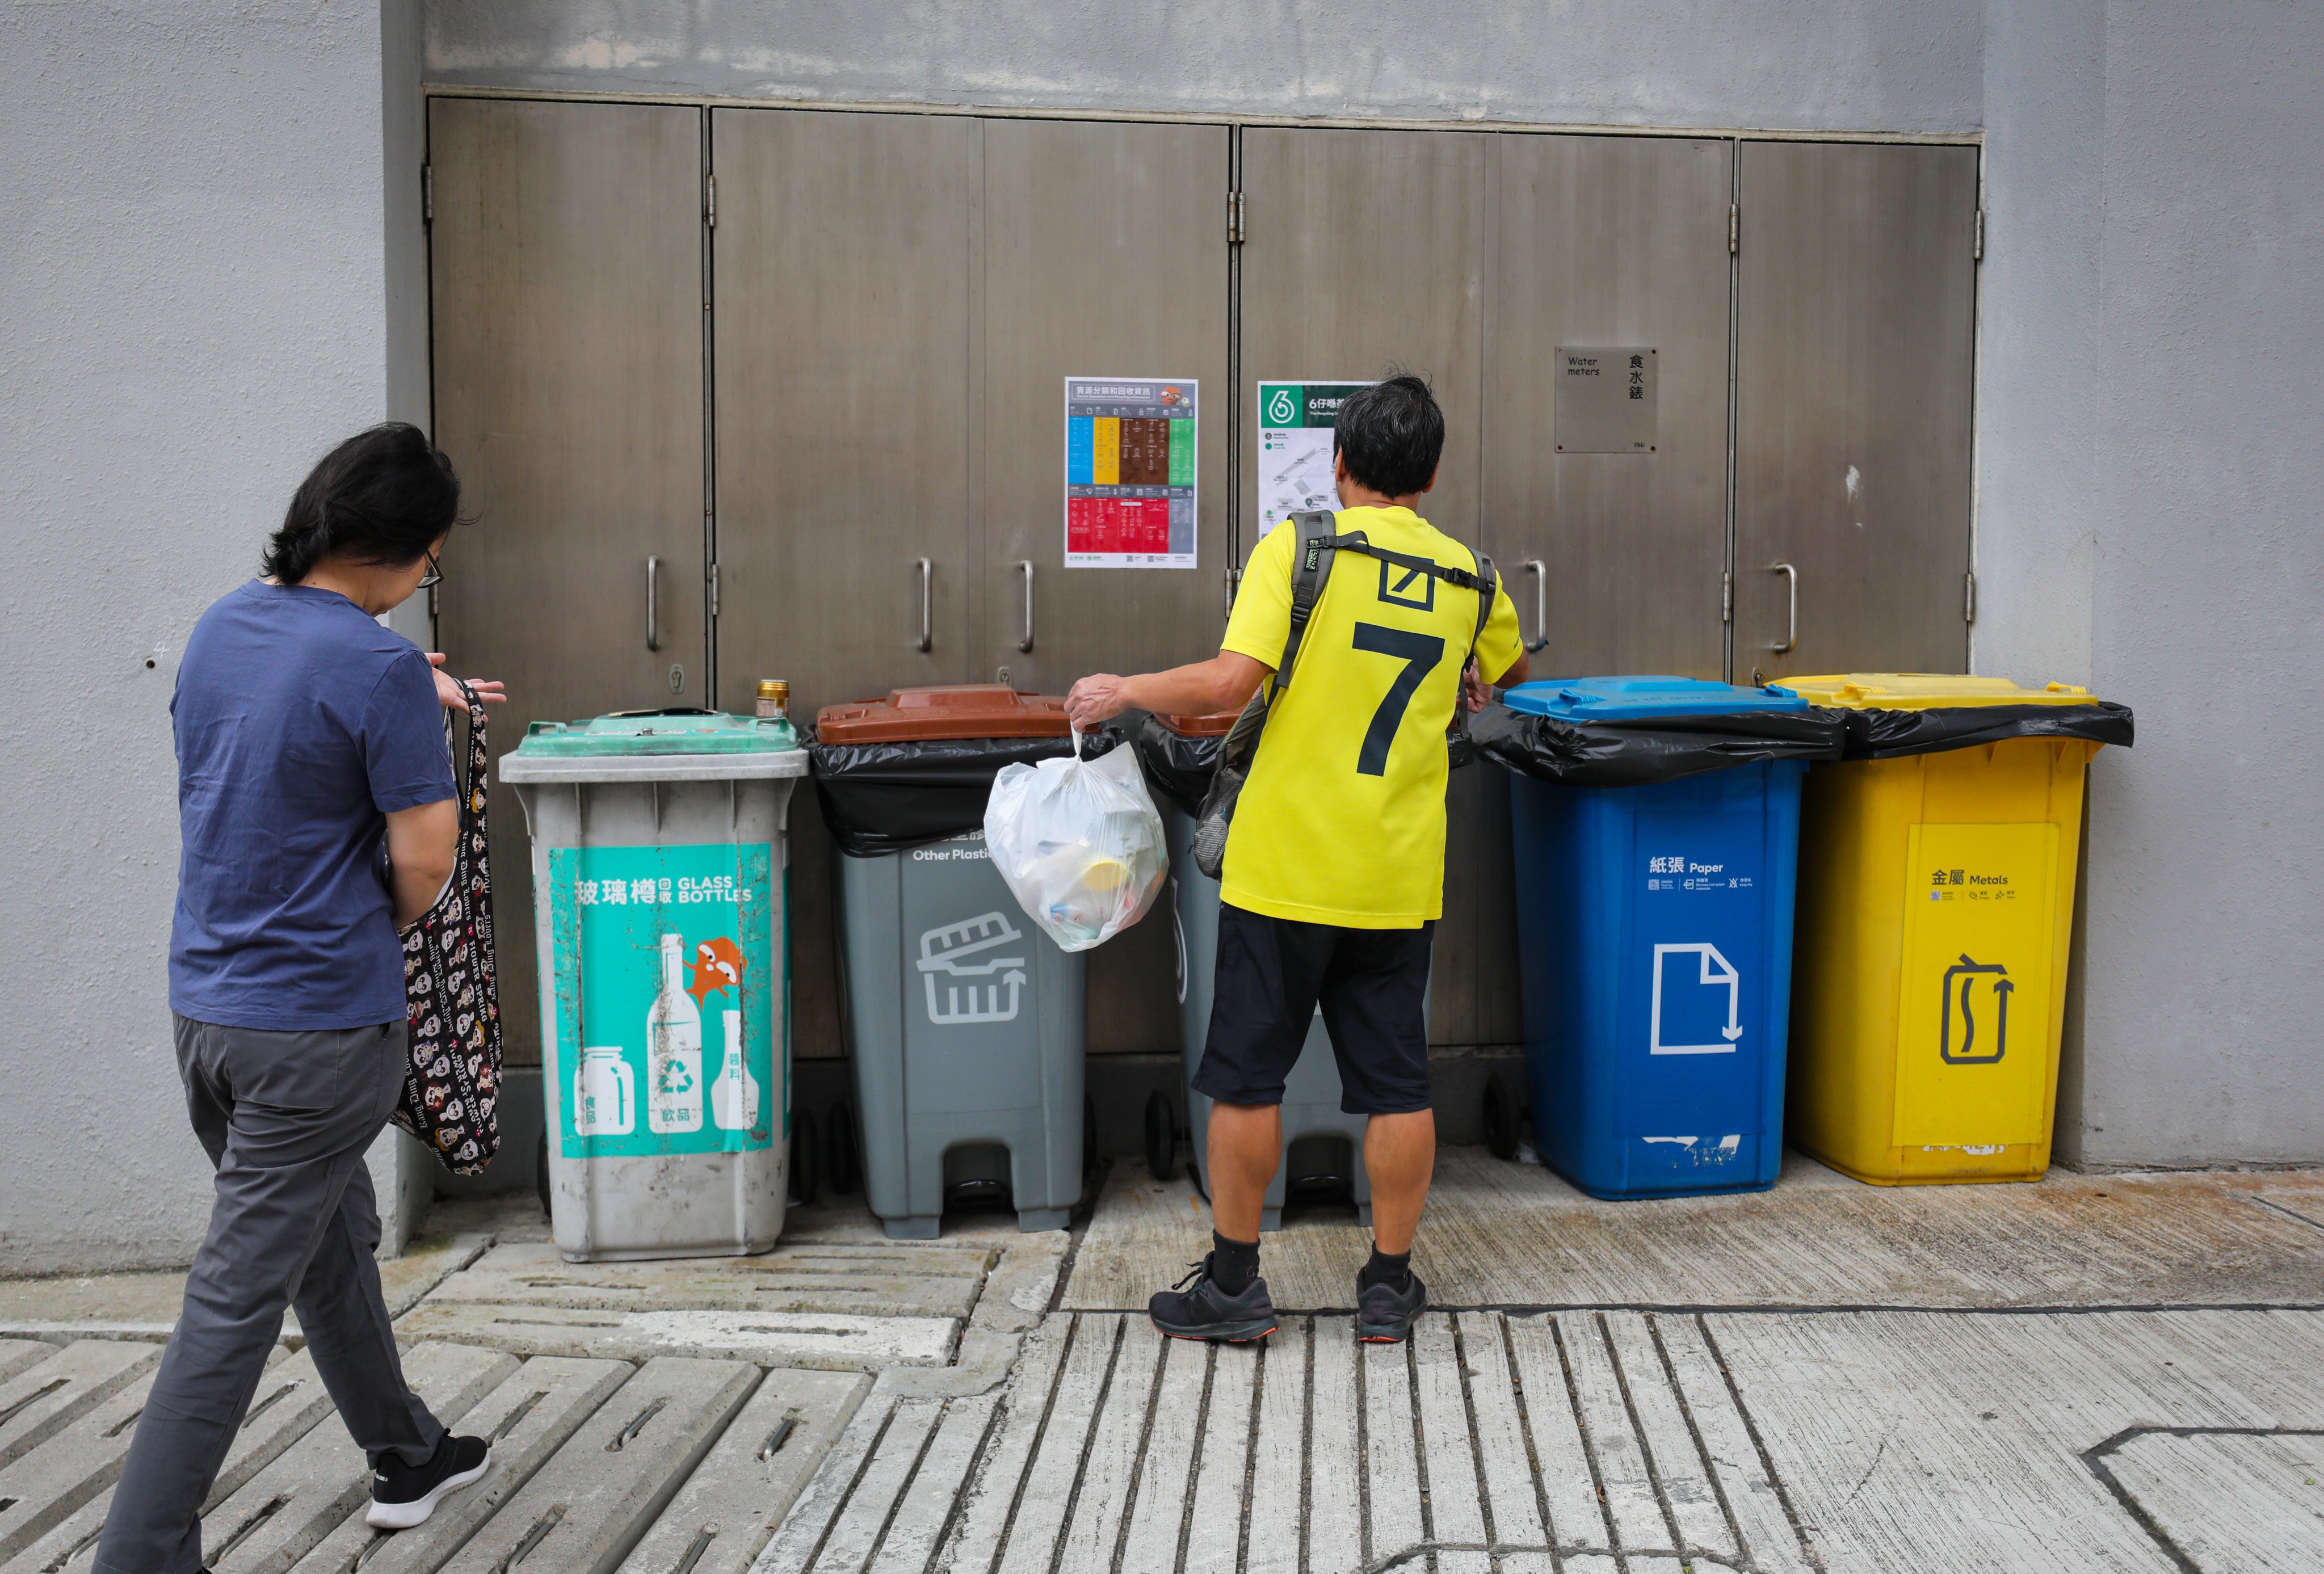 Residents recycle at Lin Tsui Estate in Chai Wan, one of the 14 locations testing out the waste-charging scheme from April 1. Before the scheme is implemented in full in August, members of the public should do a waste audit to understand how they can cut waste disposal costs, by sorting rubbish for recycling. Photo: Xiaomei Chen